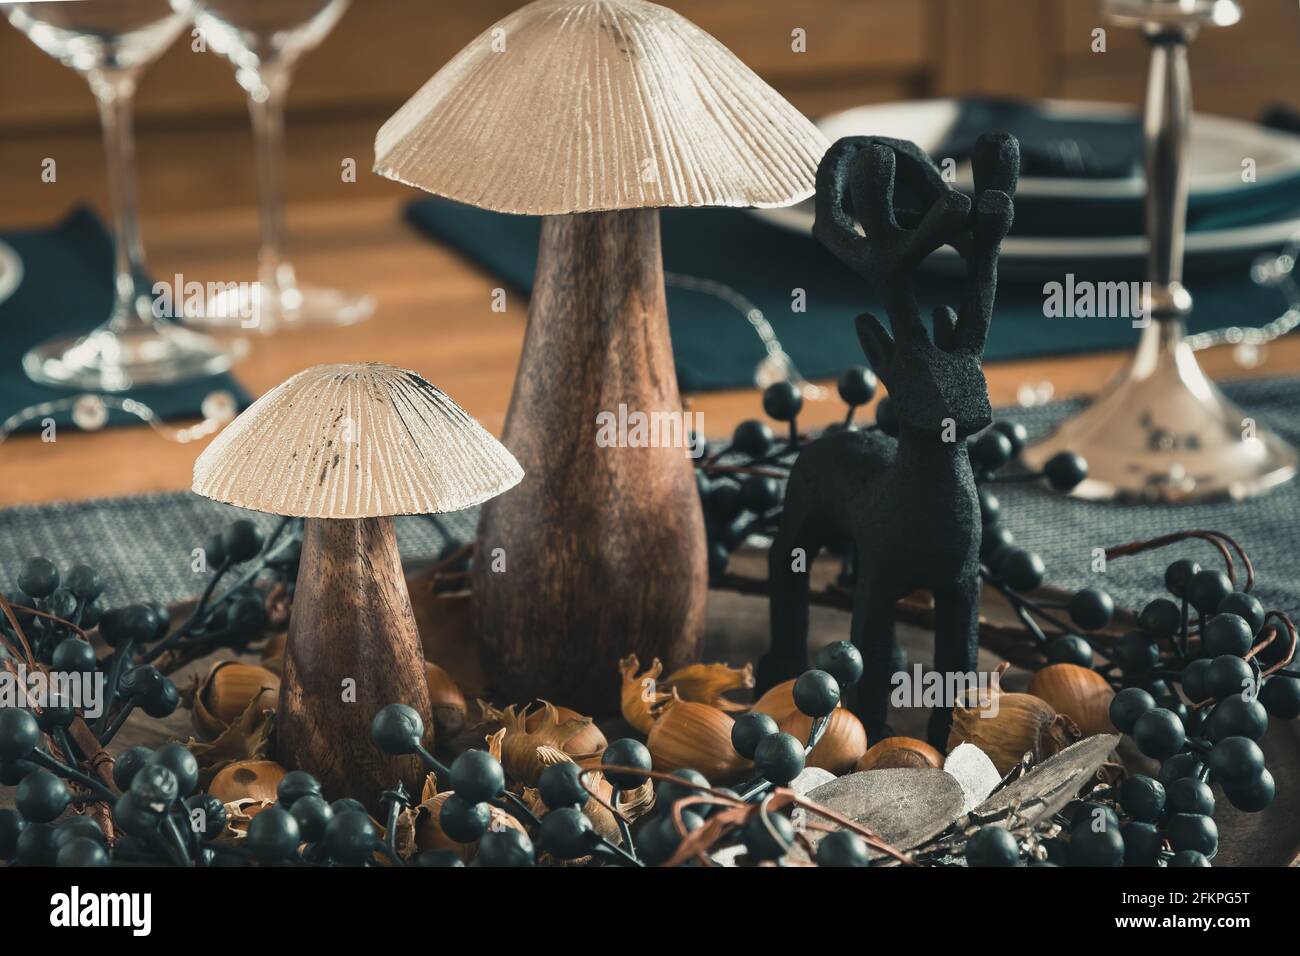 Closeup of autumnal table decoration with wooden mushrooms, berry wreath, hazelnuts and a wooden deer, dominated by dark blue, silver and wood colors Stock Photo